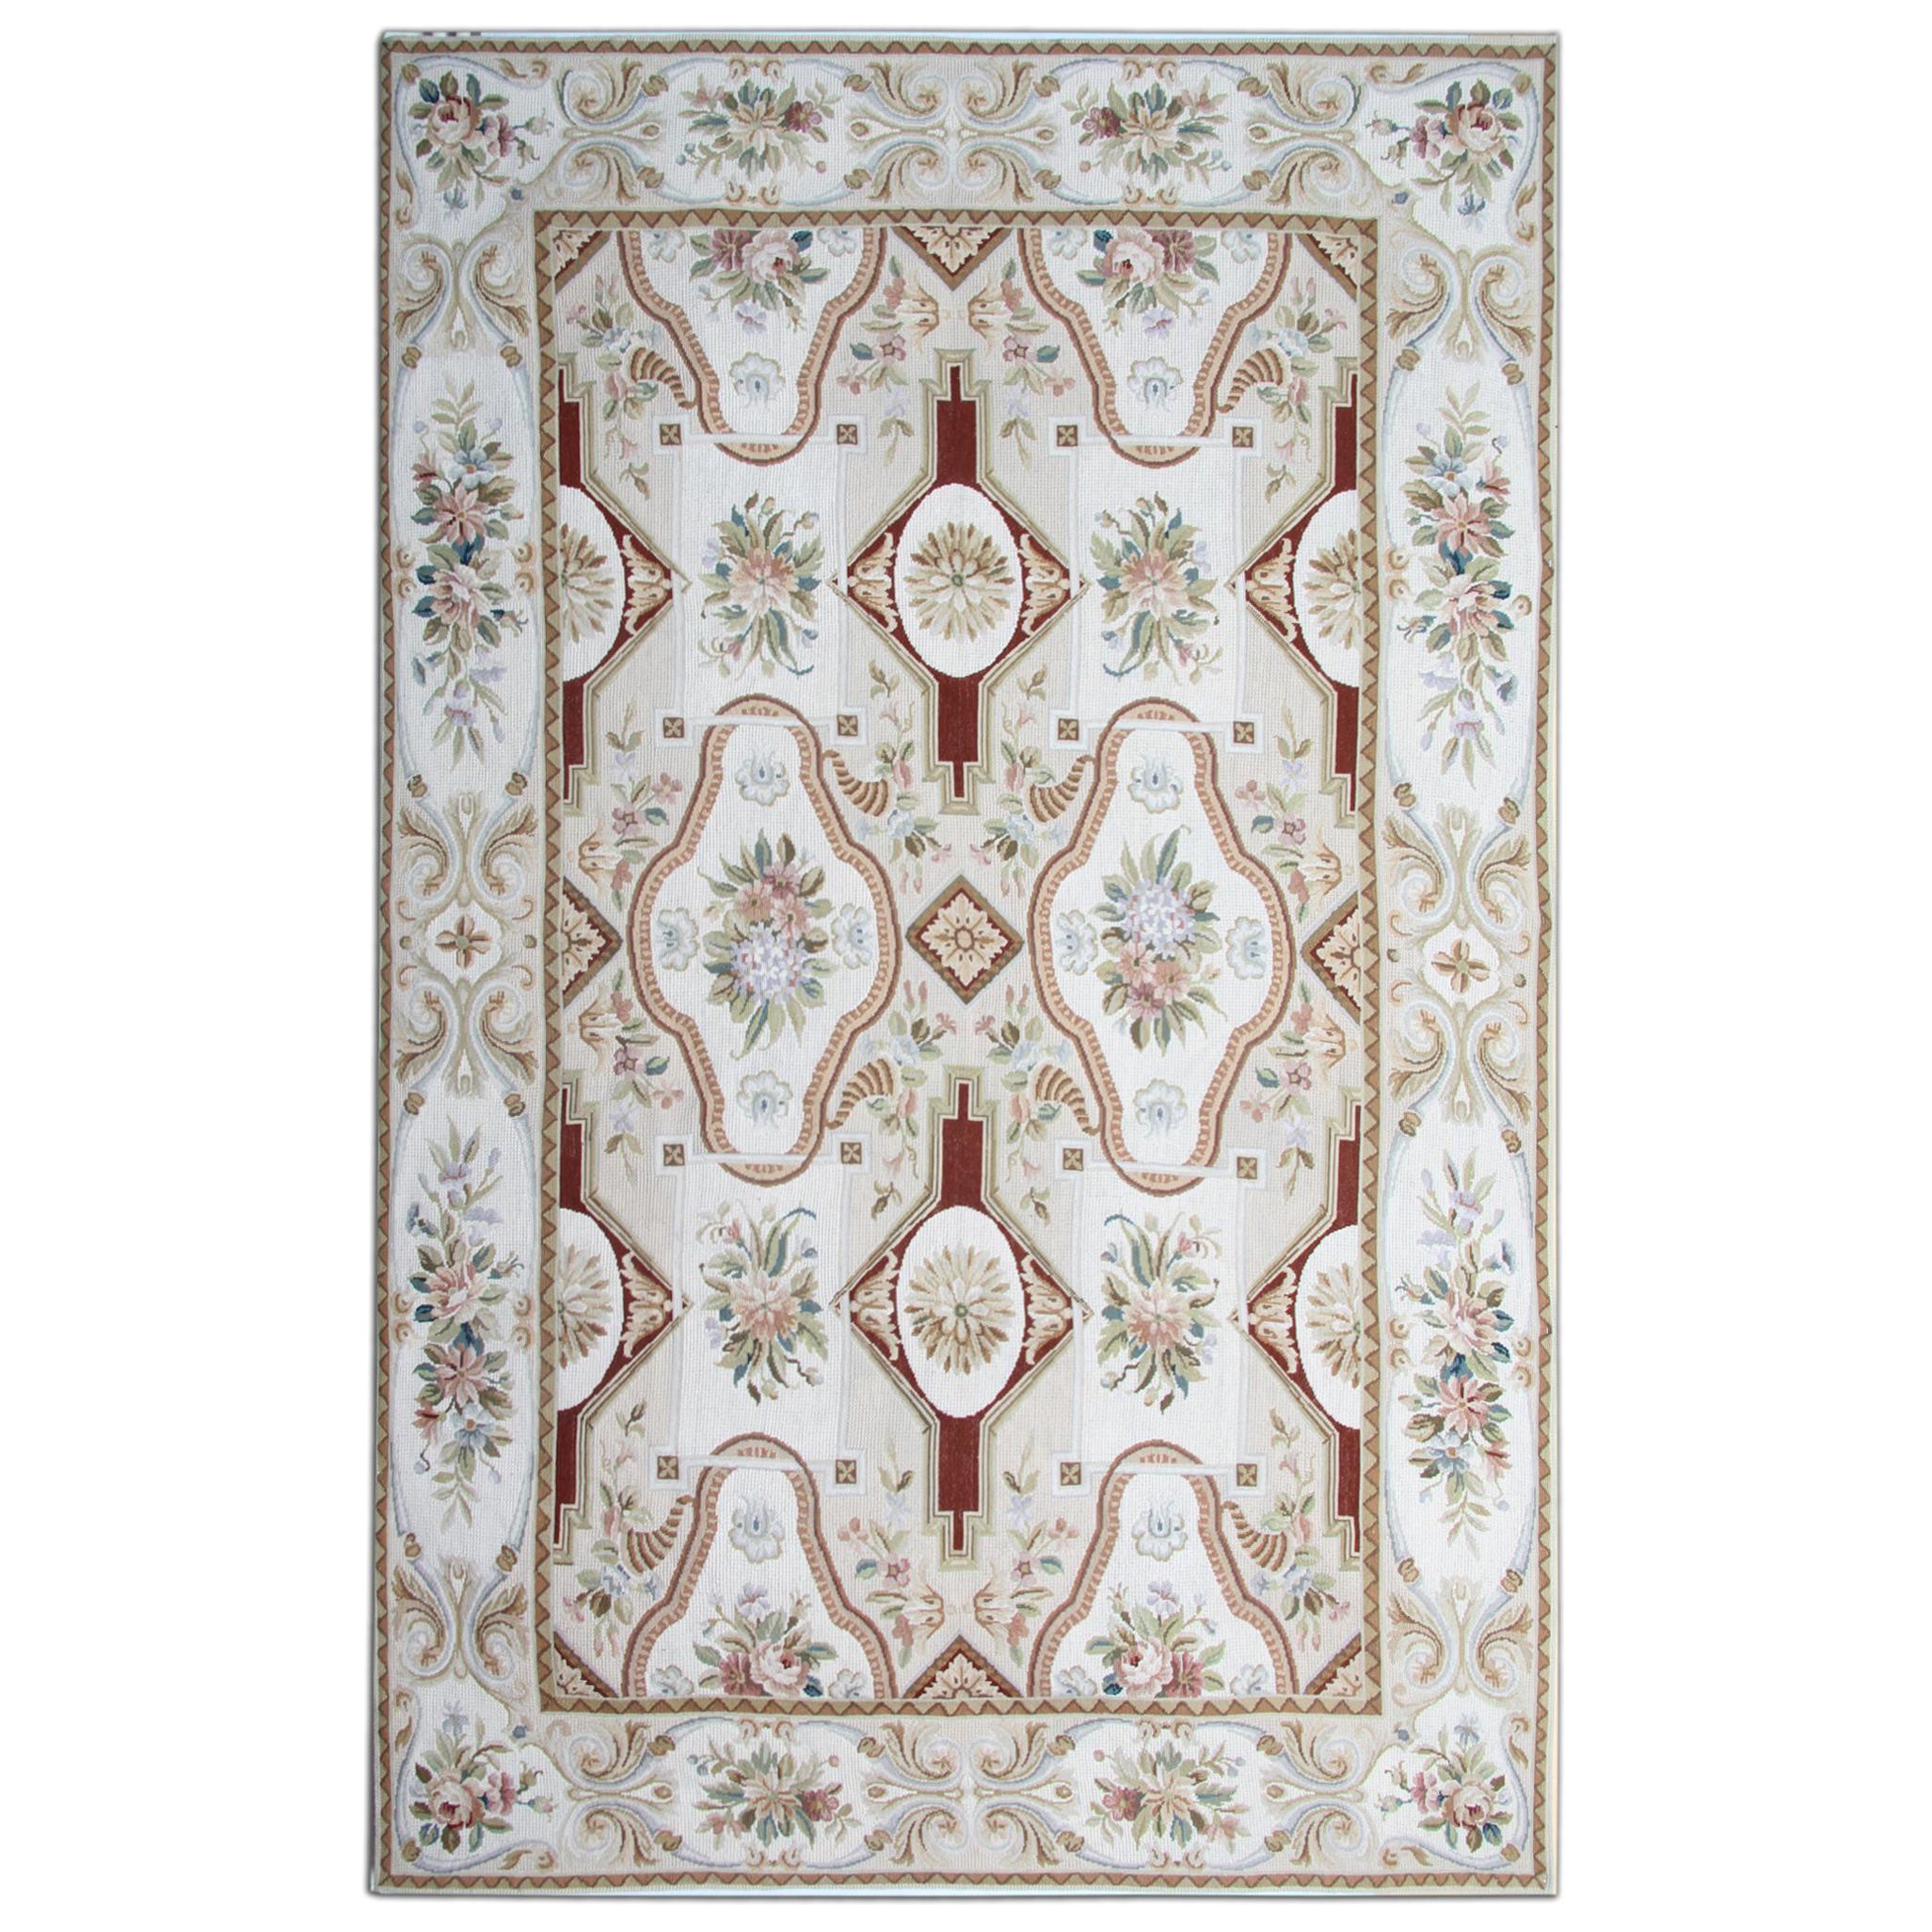 Aubusson Style Area Rug Traditional Carpet Handwoven Wool Needlepoint For Sale